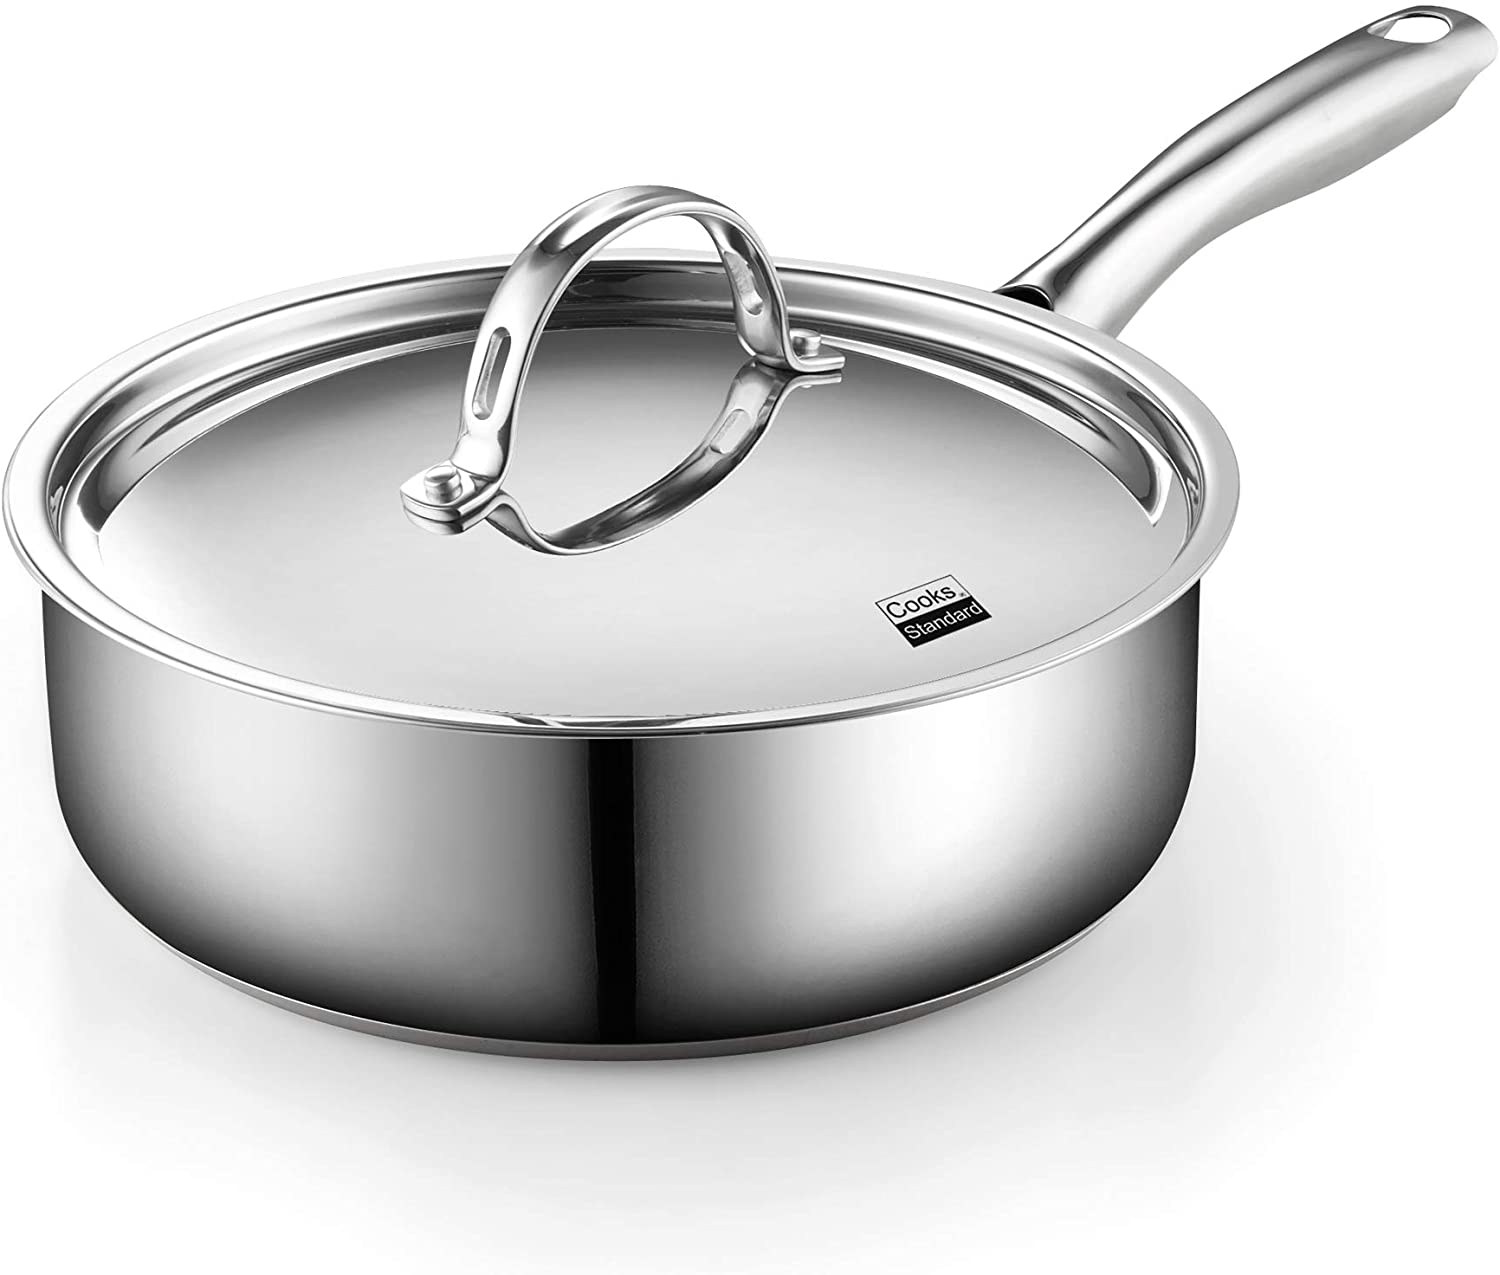 Cooks Standard Classic 5 qt. Stainless Steel Saute Pan with Lid